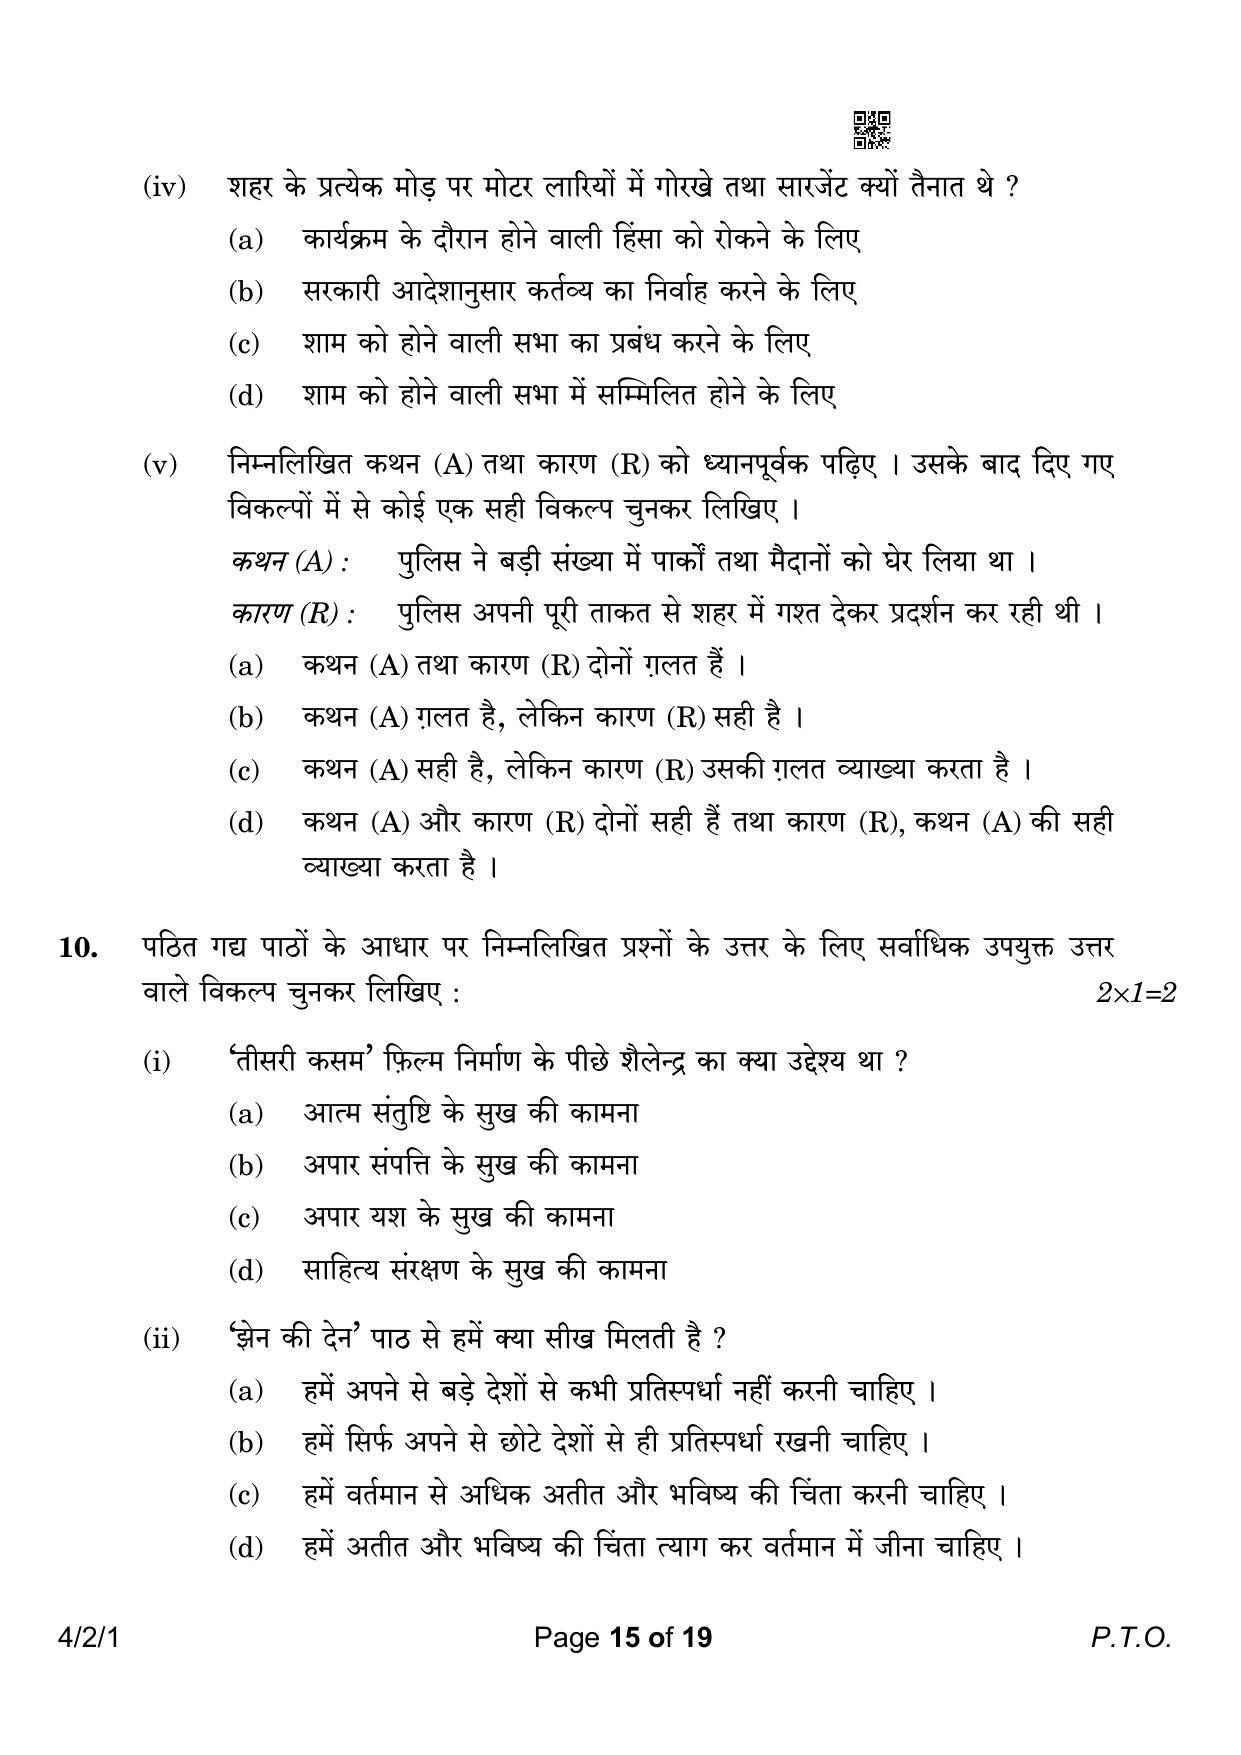 CBSE Class 10 4-2-1 Hindi B 2023 Question Paper - Page 15